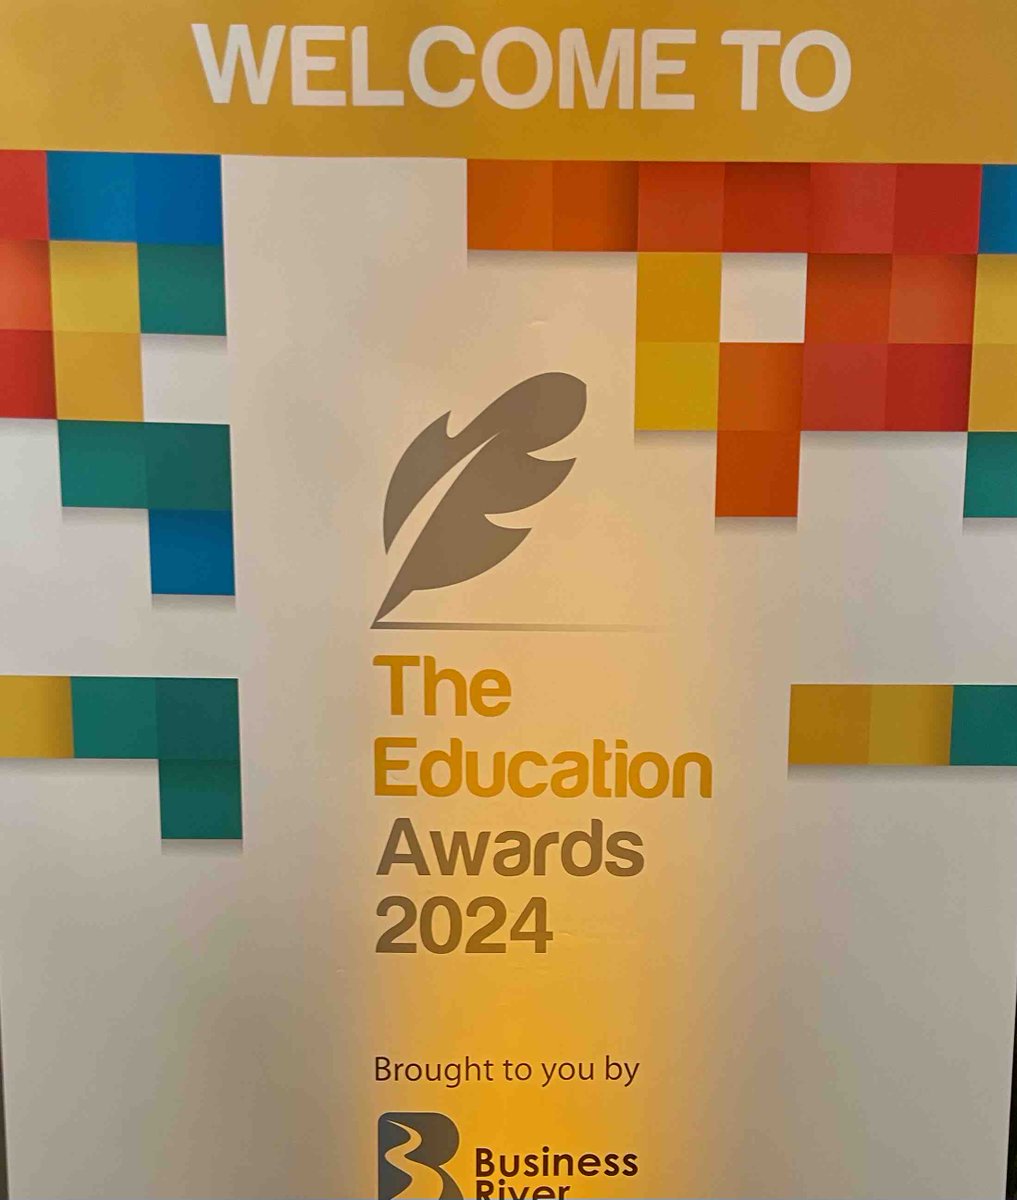 An exciting evening ahead! Great to catch up with friends and colleagues and best of luck to all organisations shortlisted across all categories! #YourCollegeYourFuture